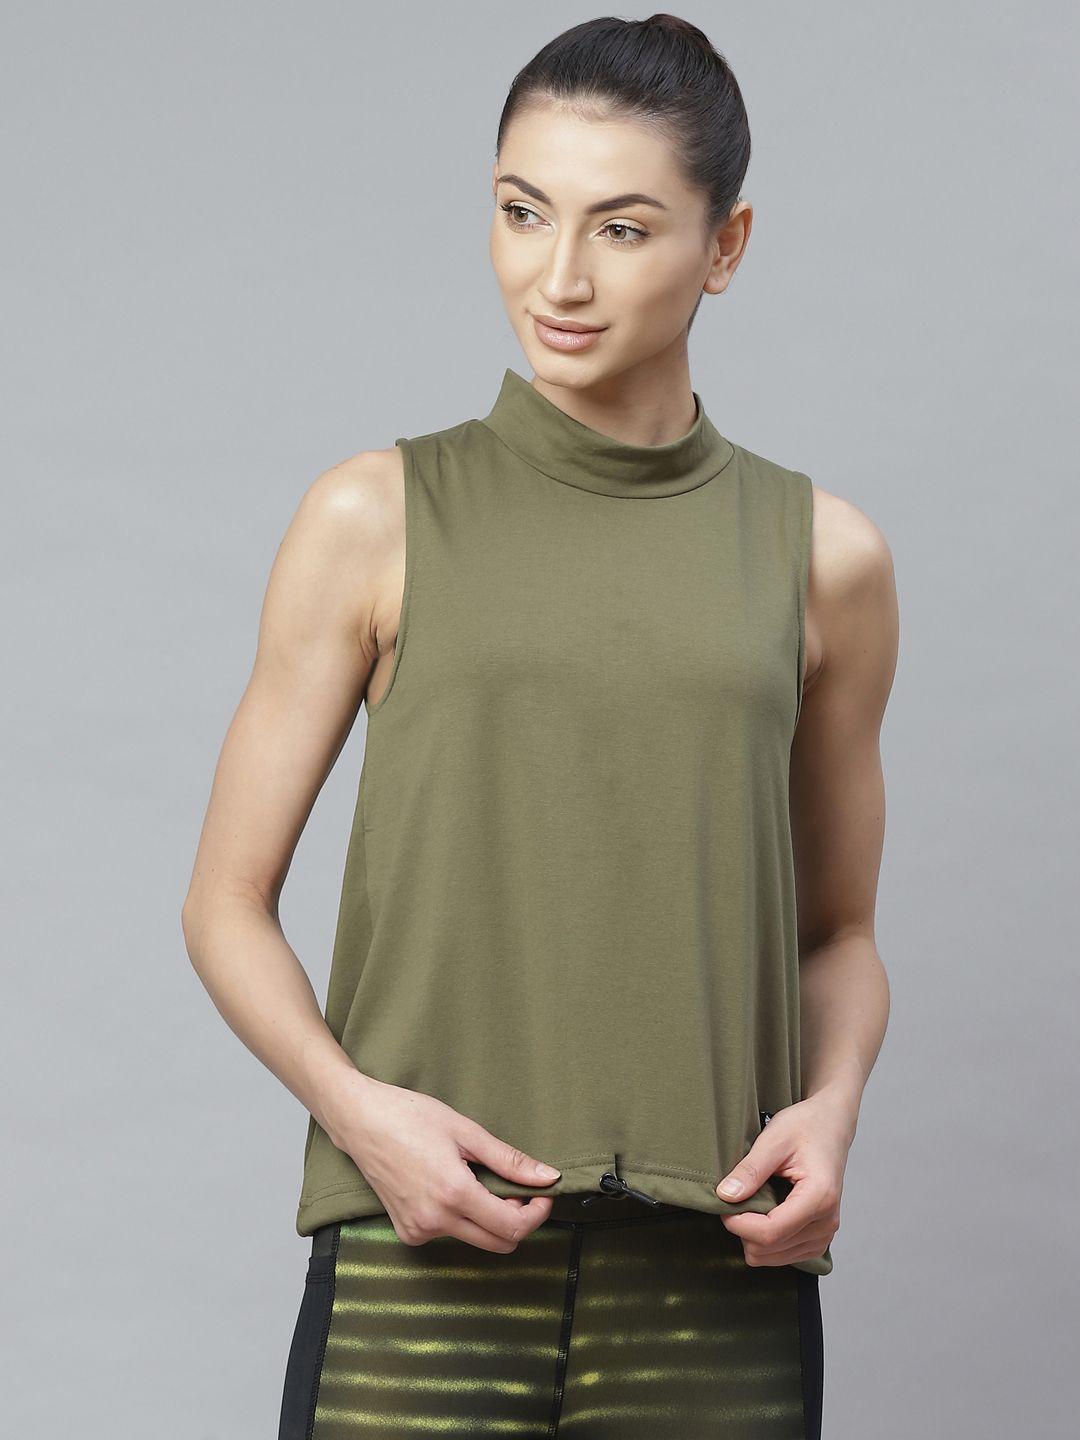 skyria women olive green solid top